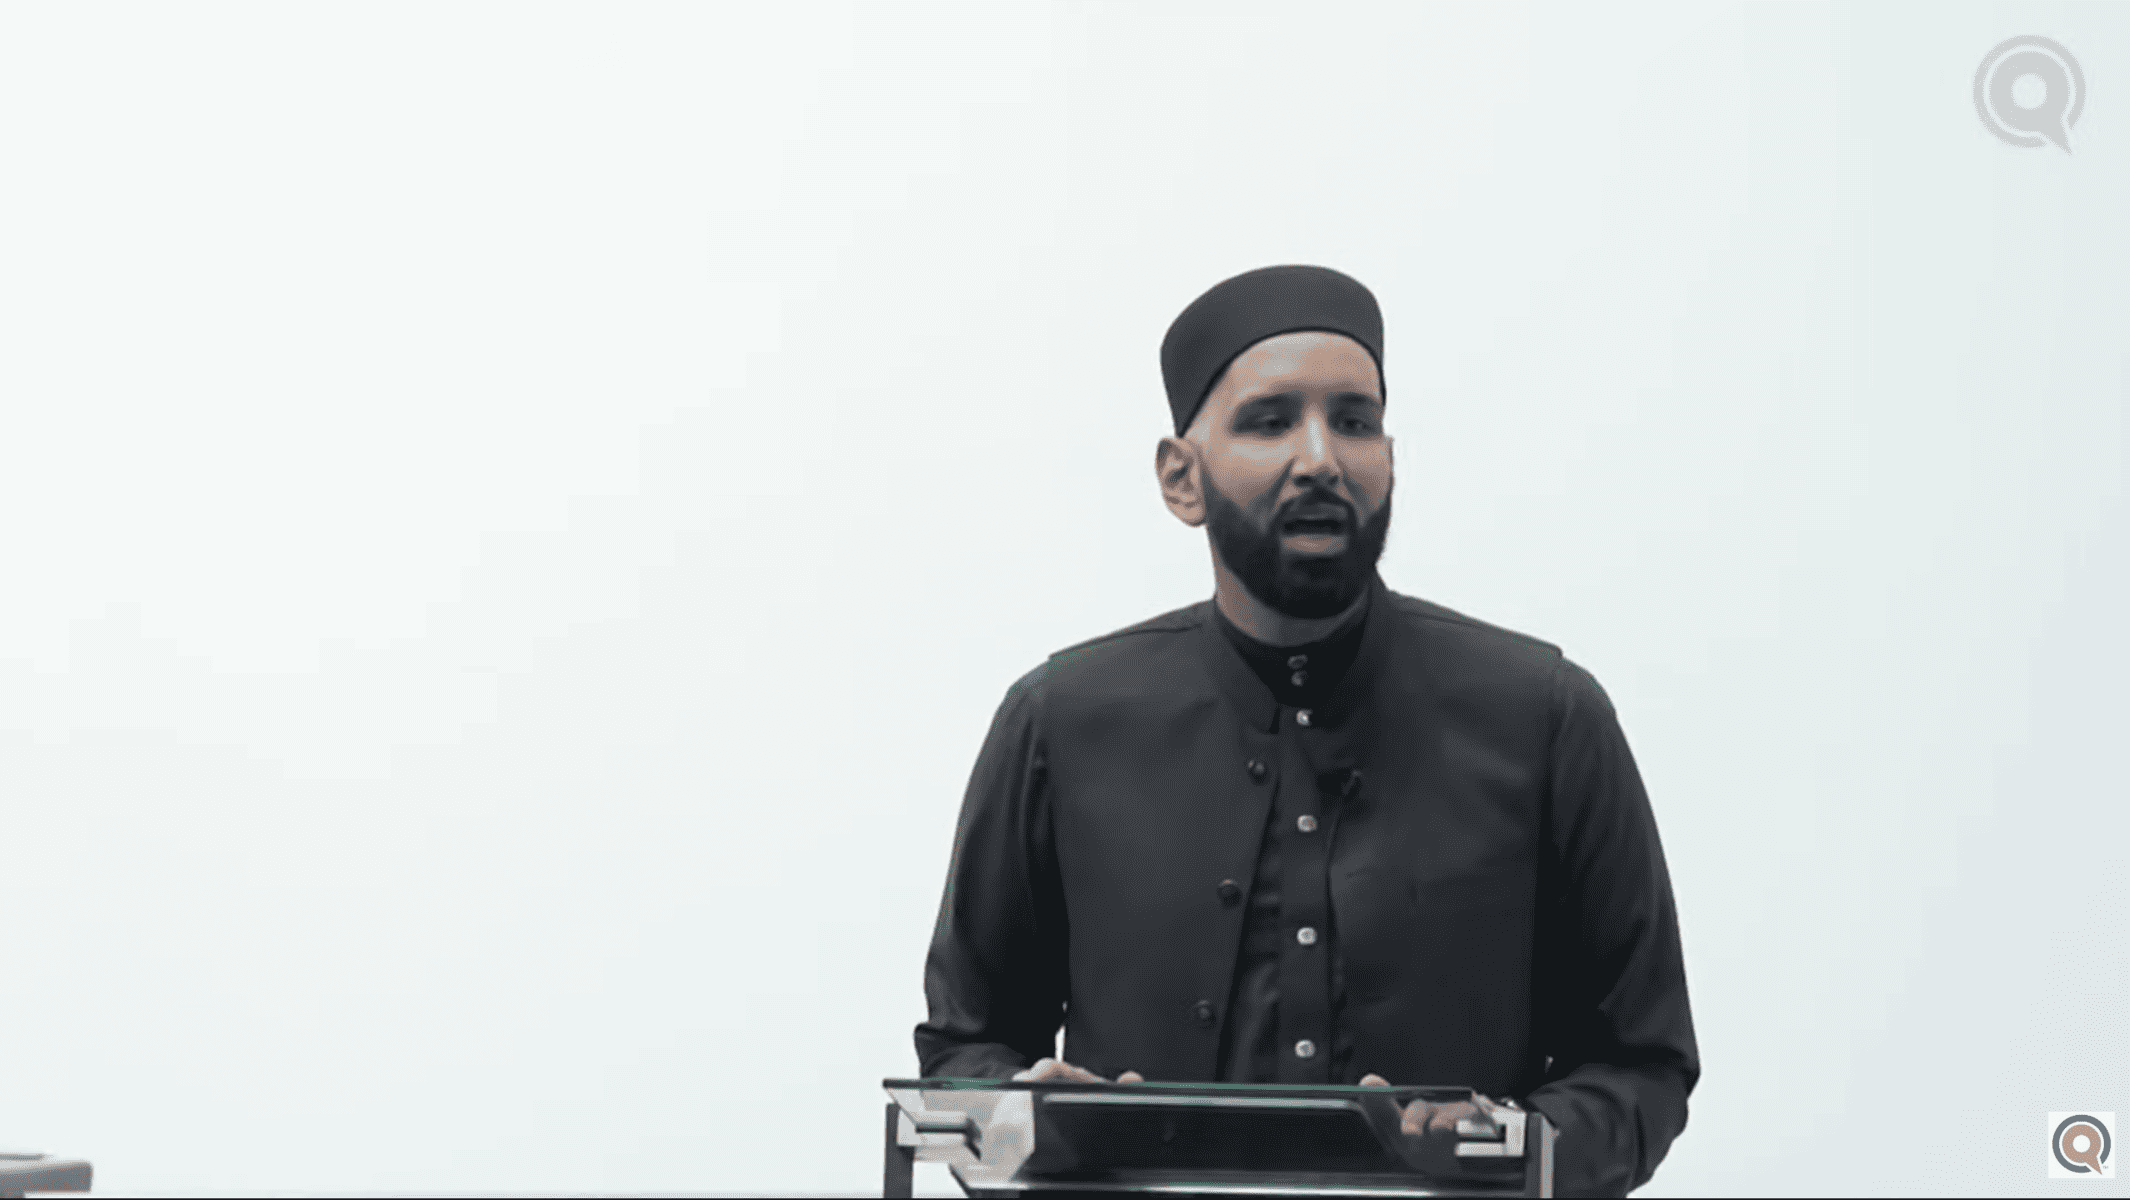 Omar Suleiman – How To Practice Daily Self Accountability